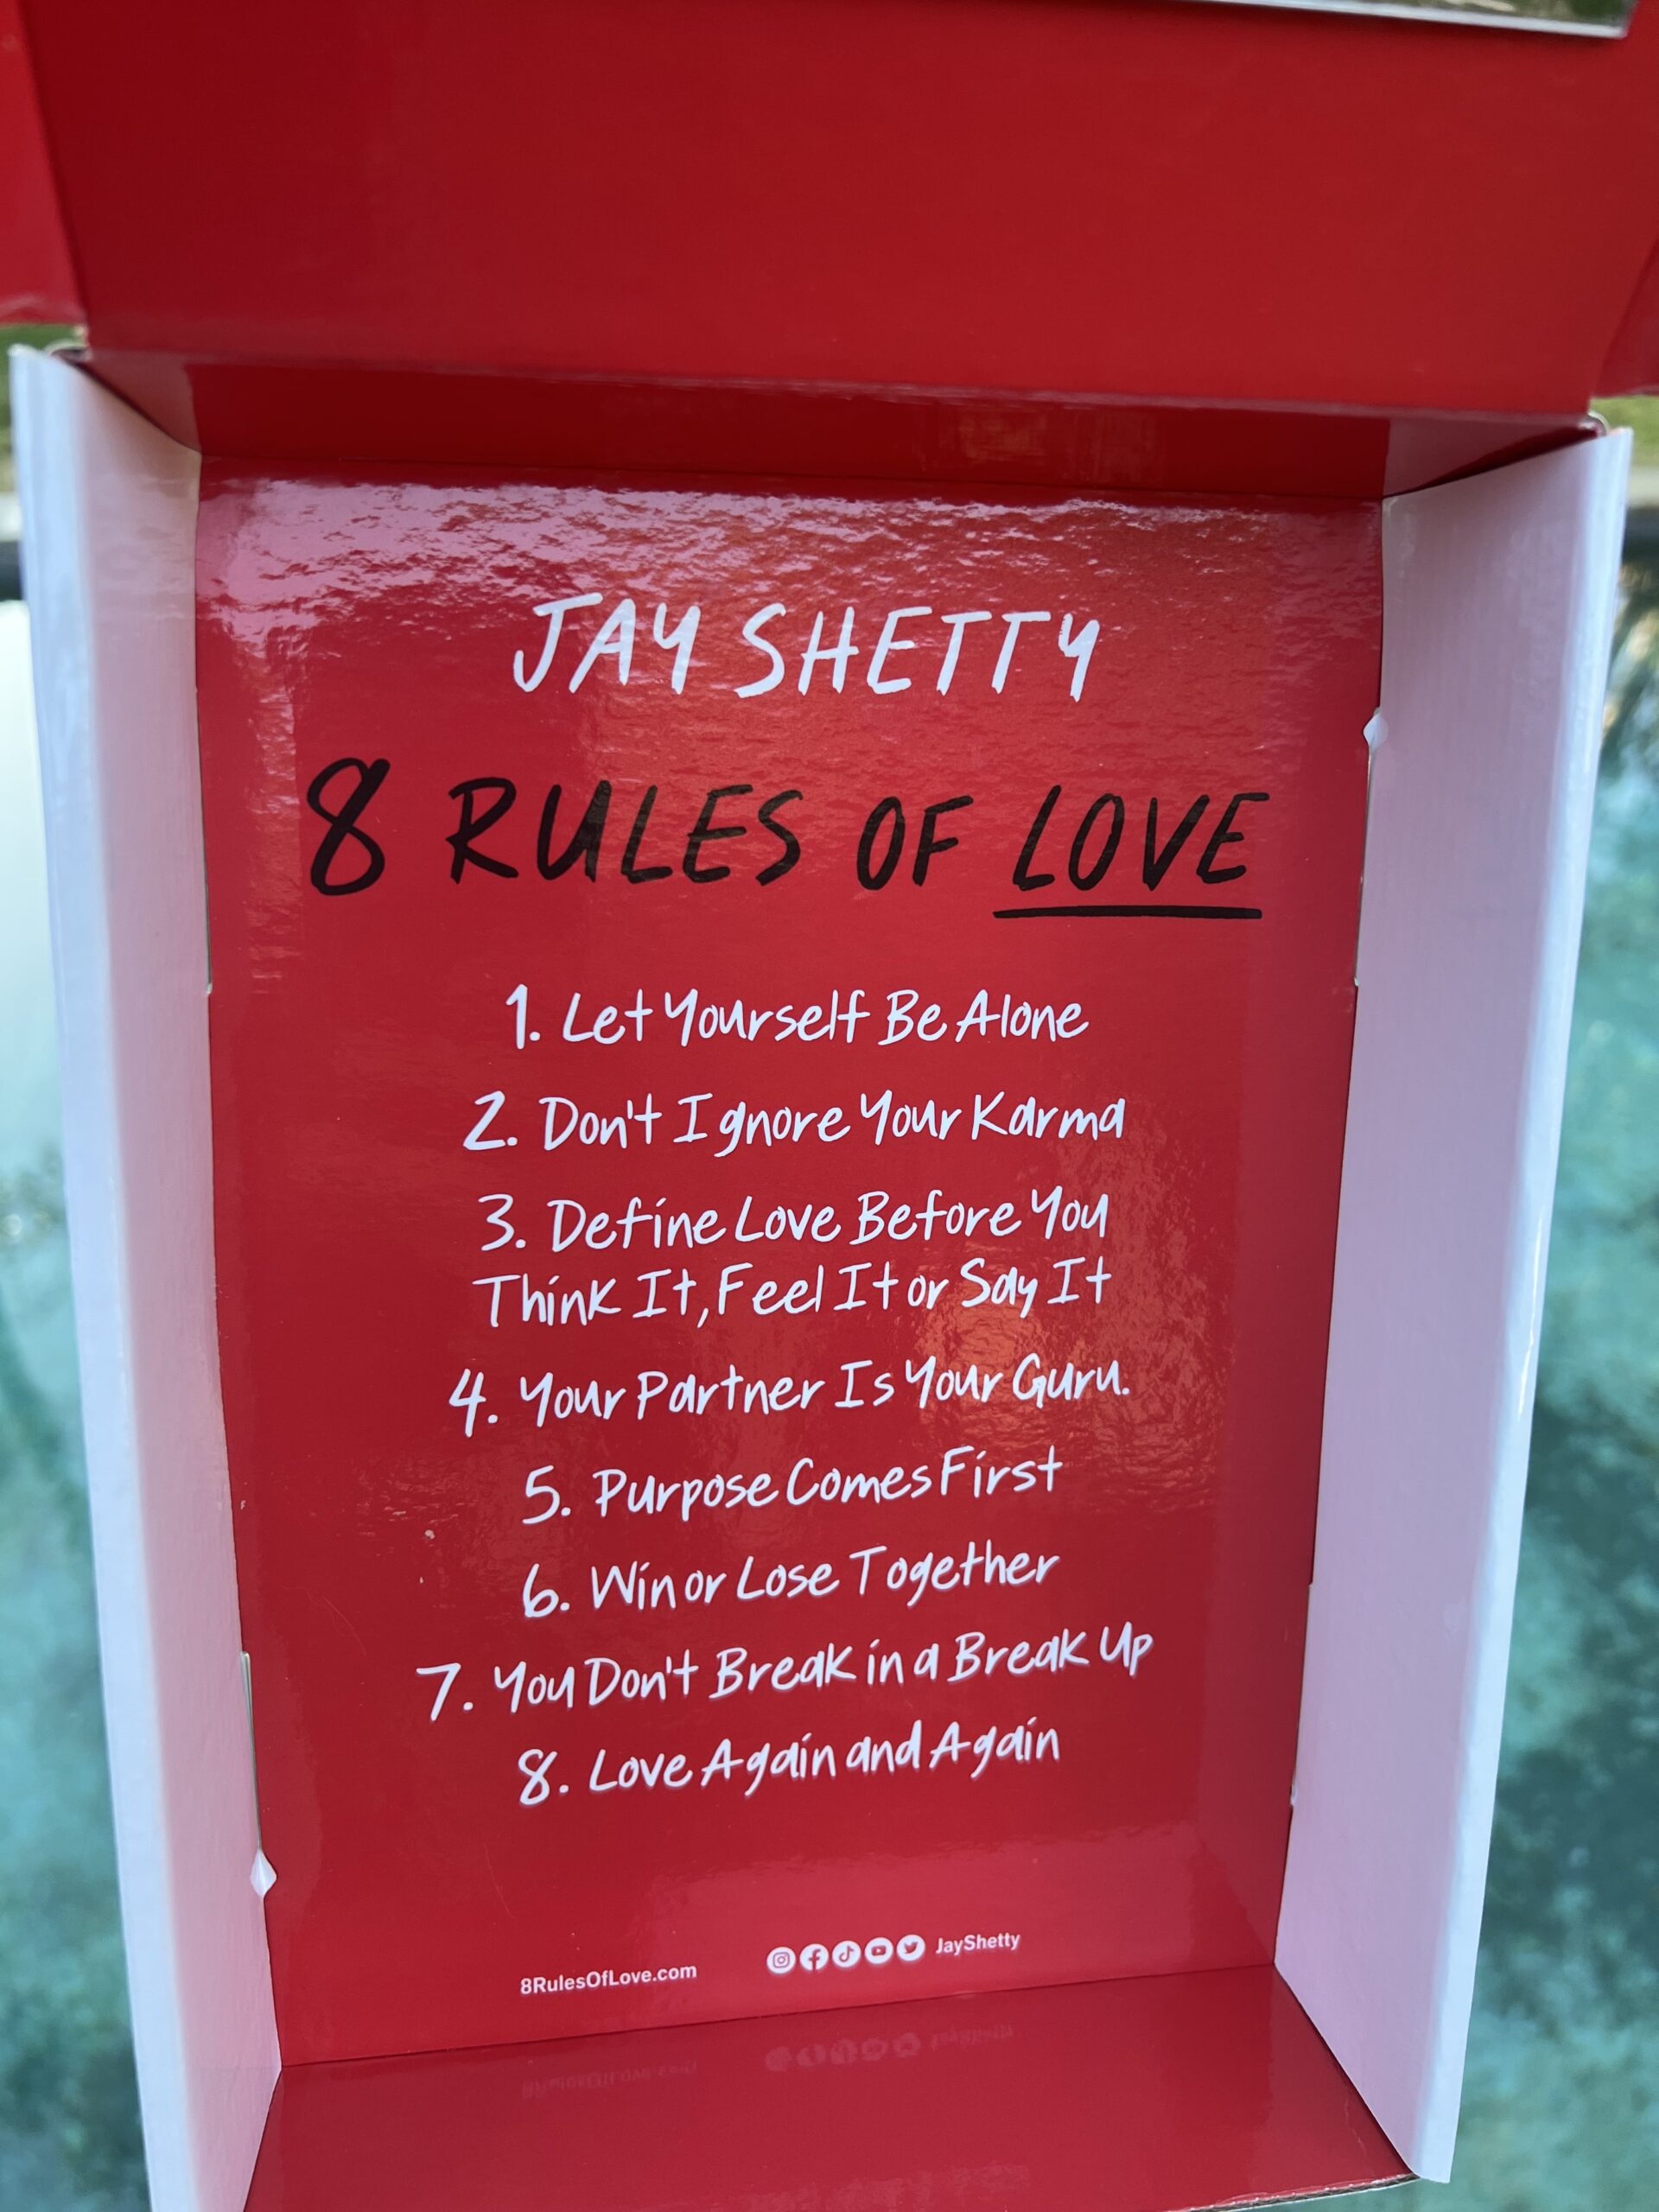 Jay Shetty's Promo box from new book release 8 Rule of Love